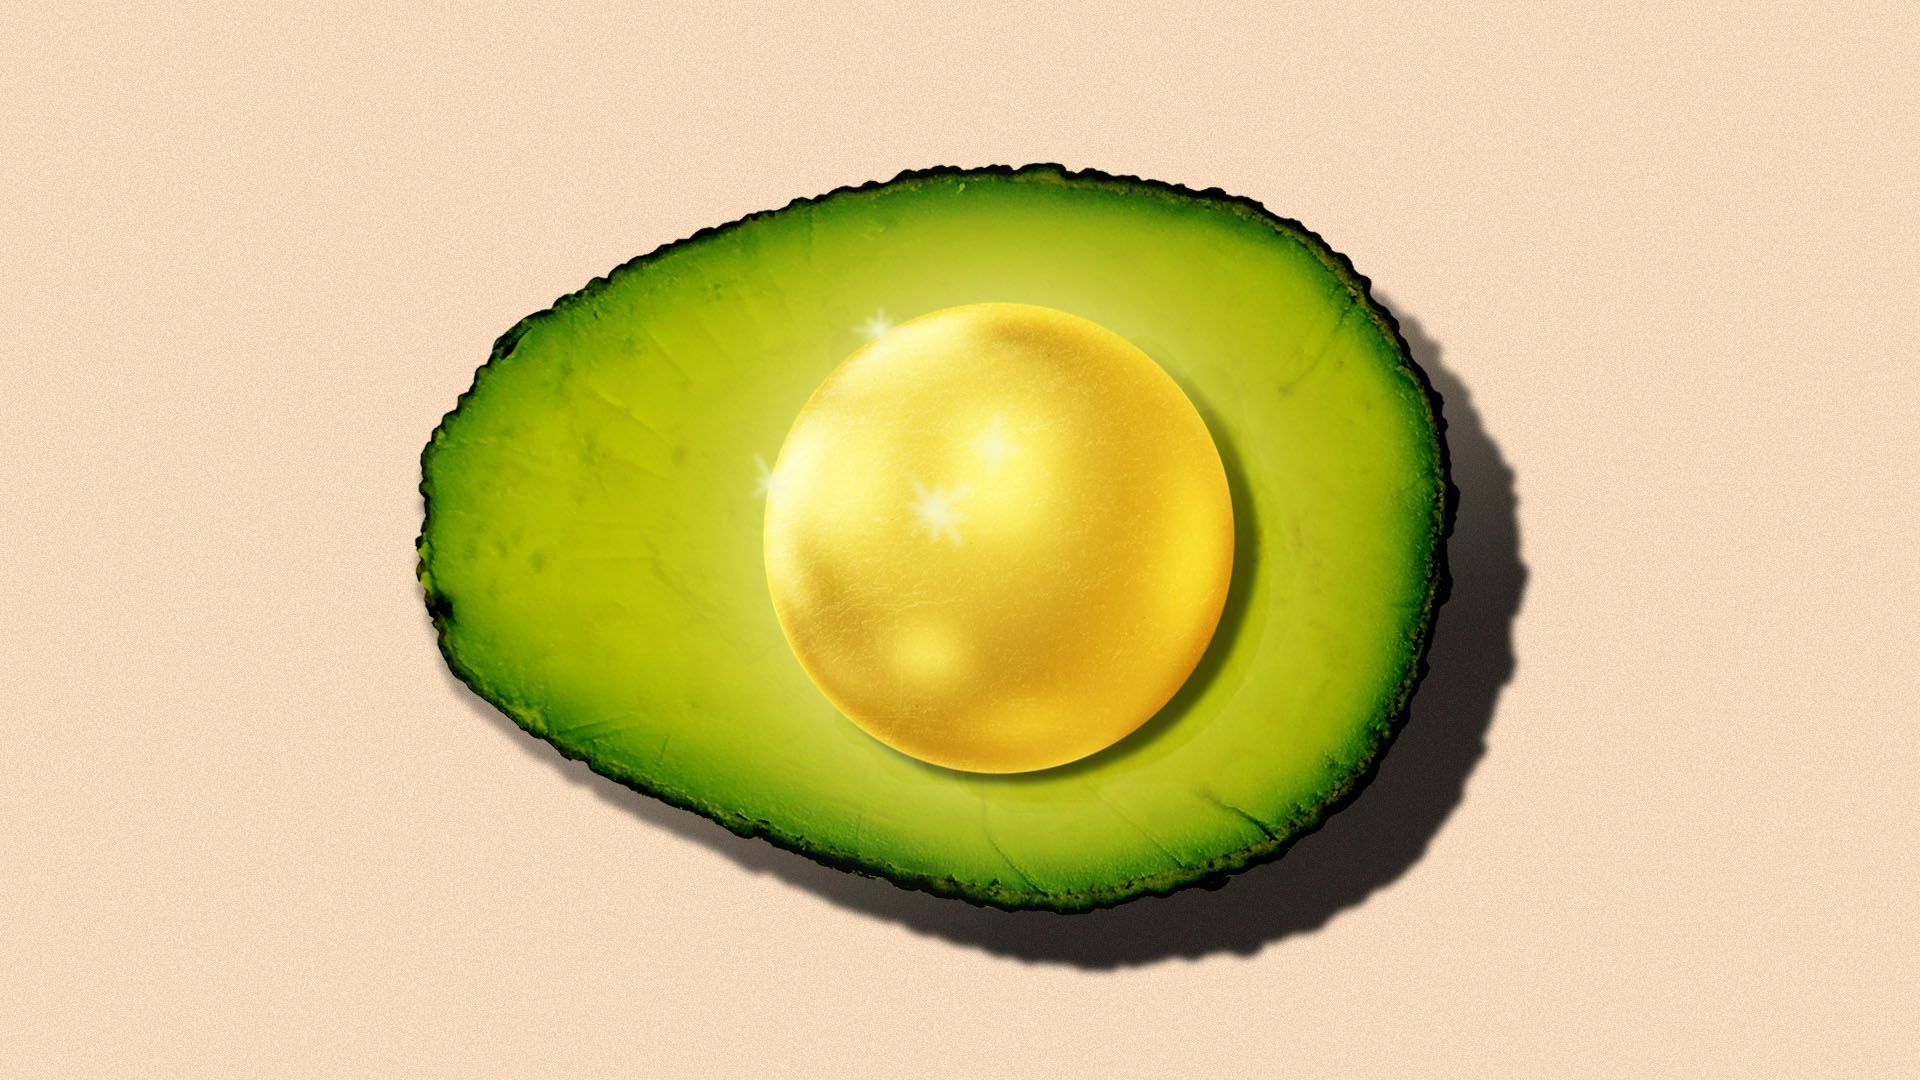 Illustration of an avocado with a golden seed in the middle